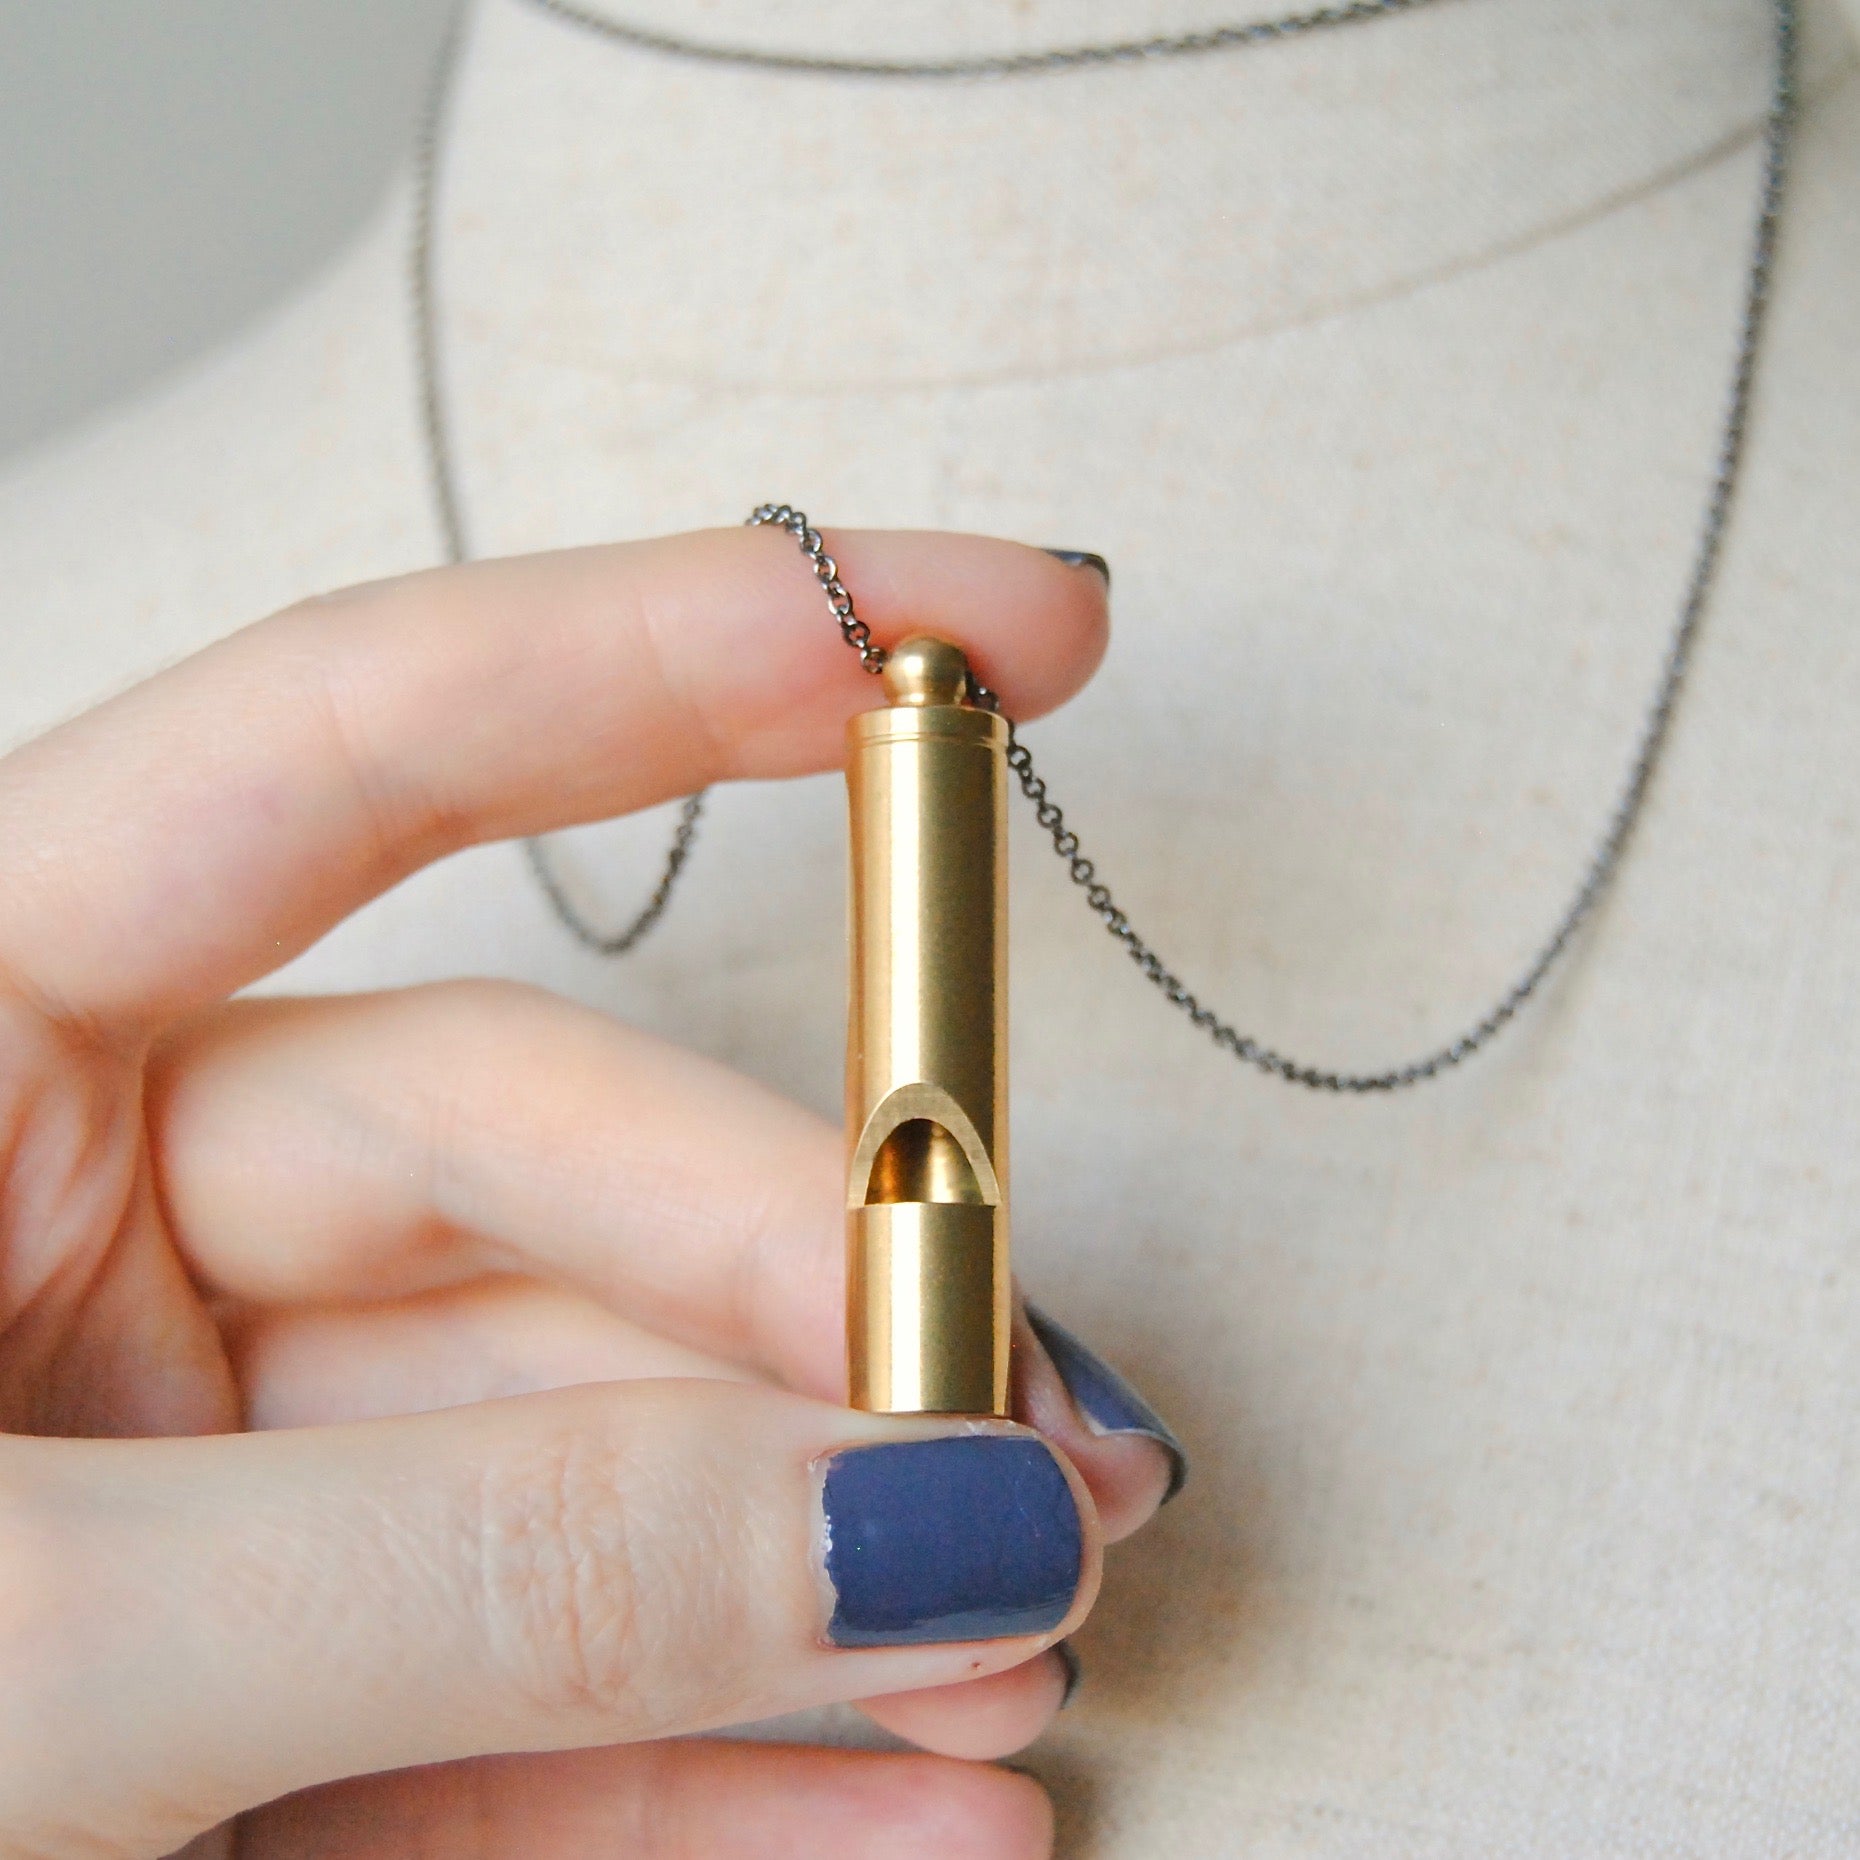 LOUD WHISTLE NECKLACE